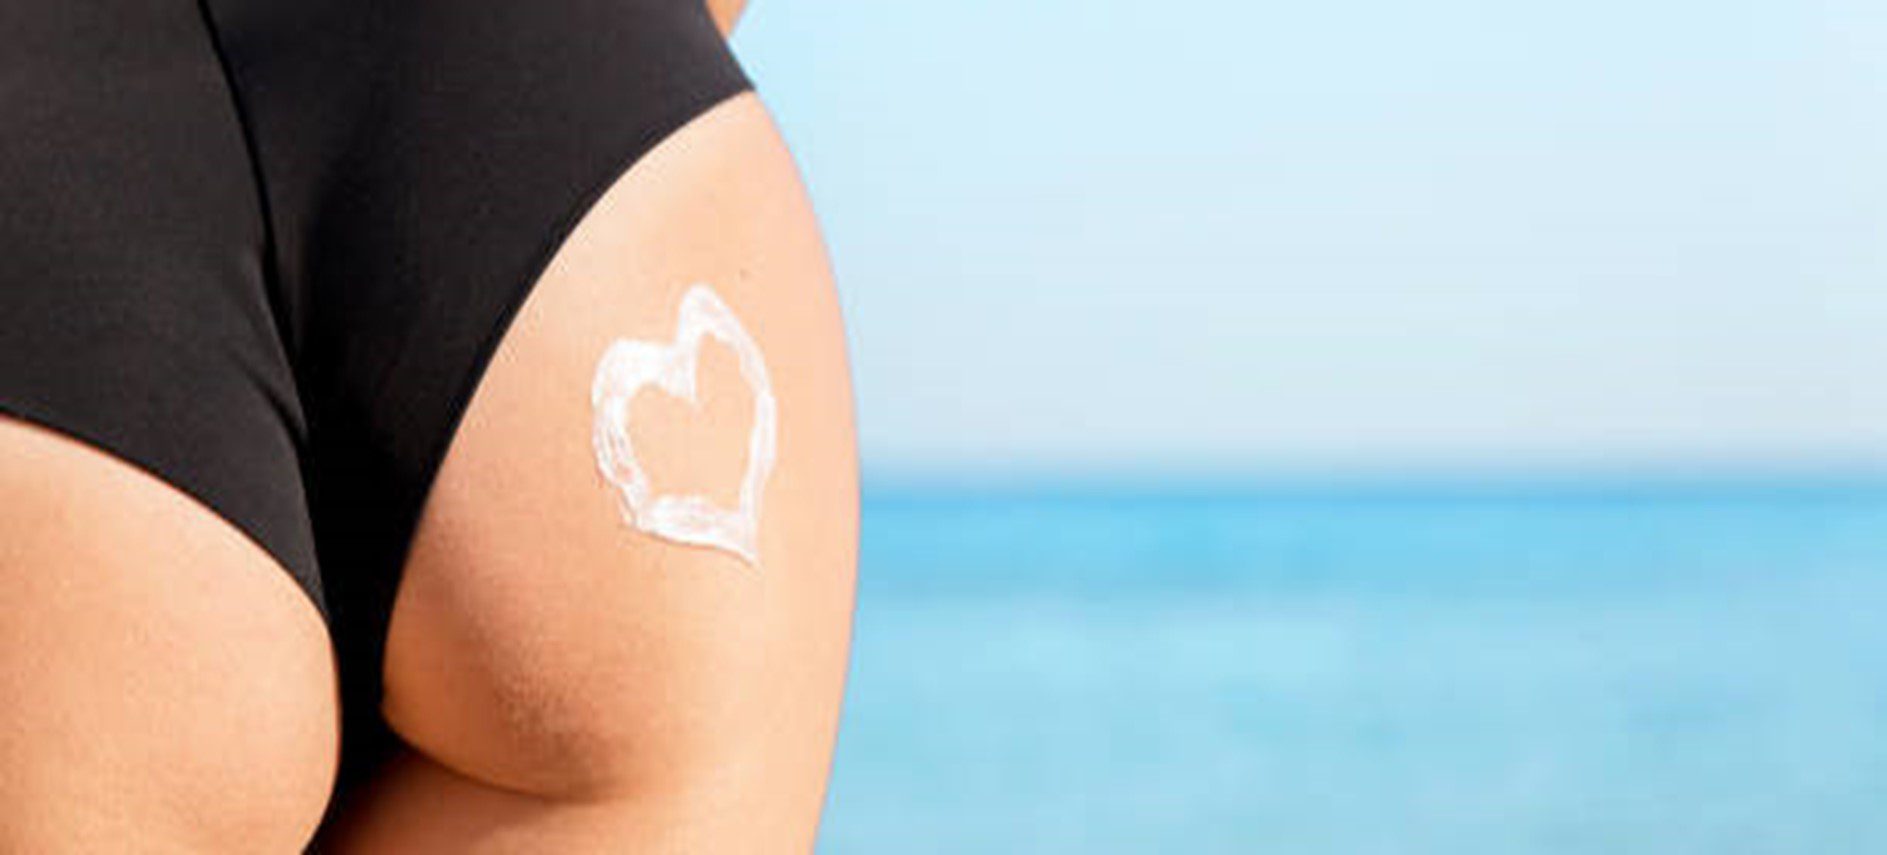 A woman with a heart shaped sunscreen on her arm.